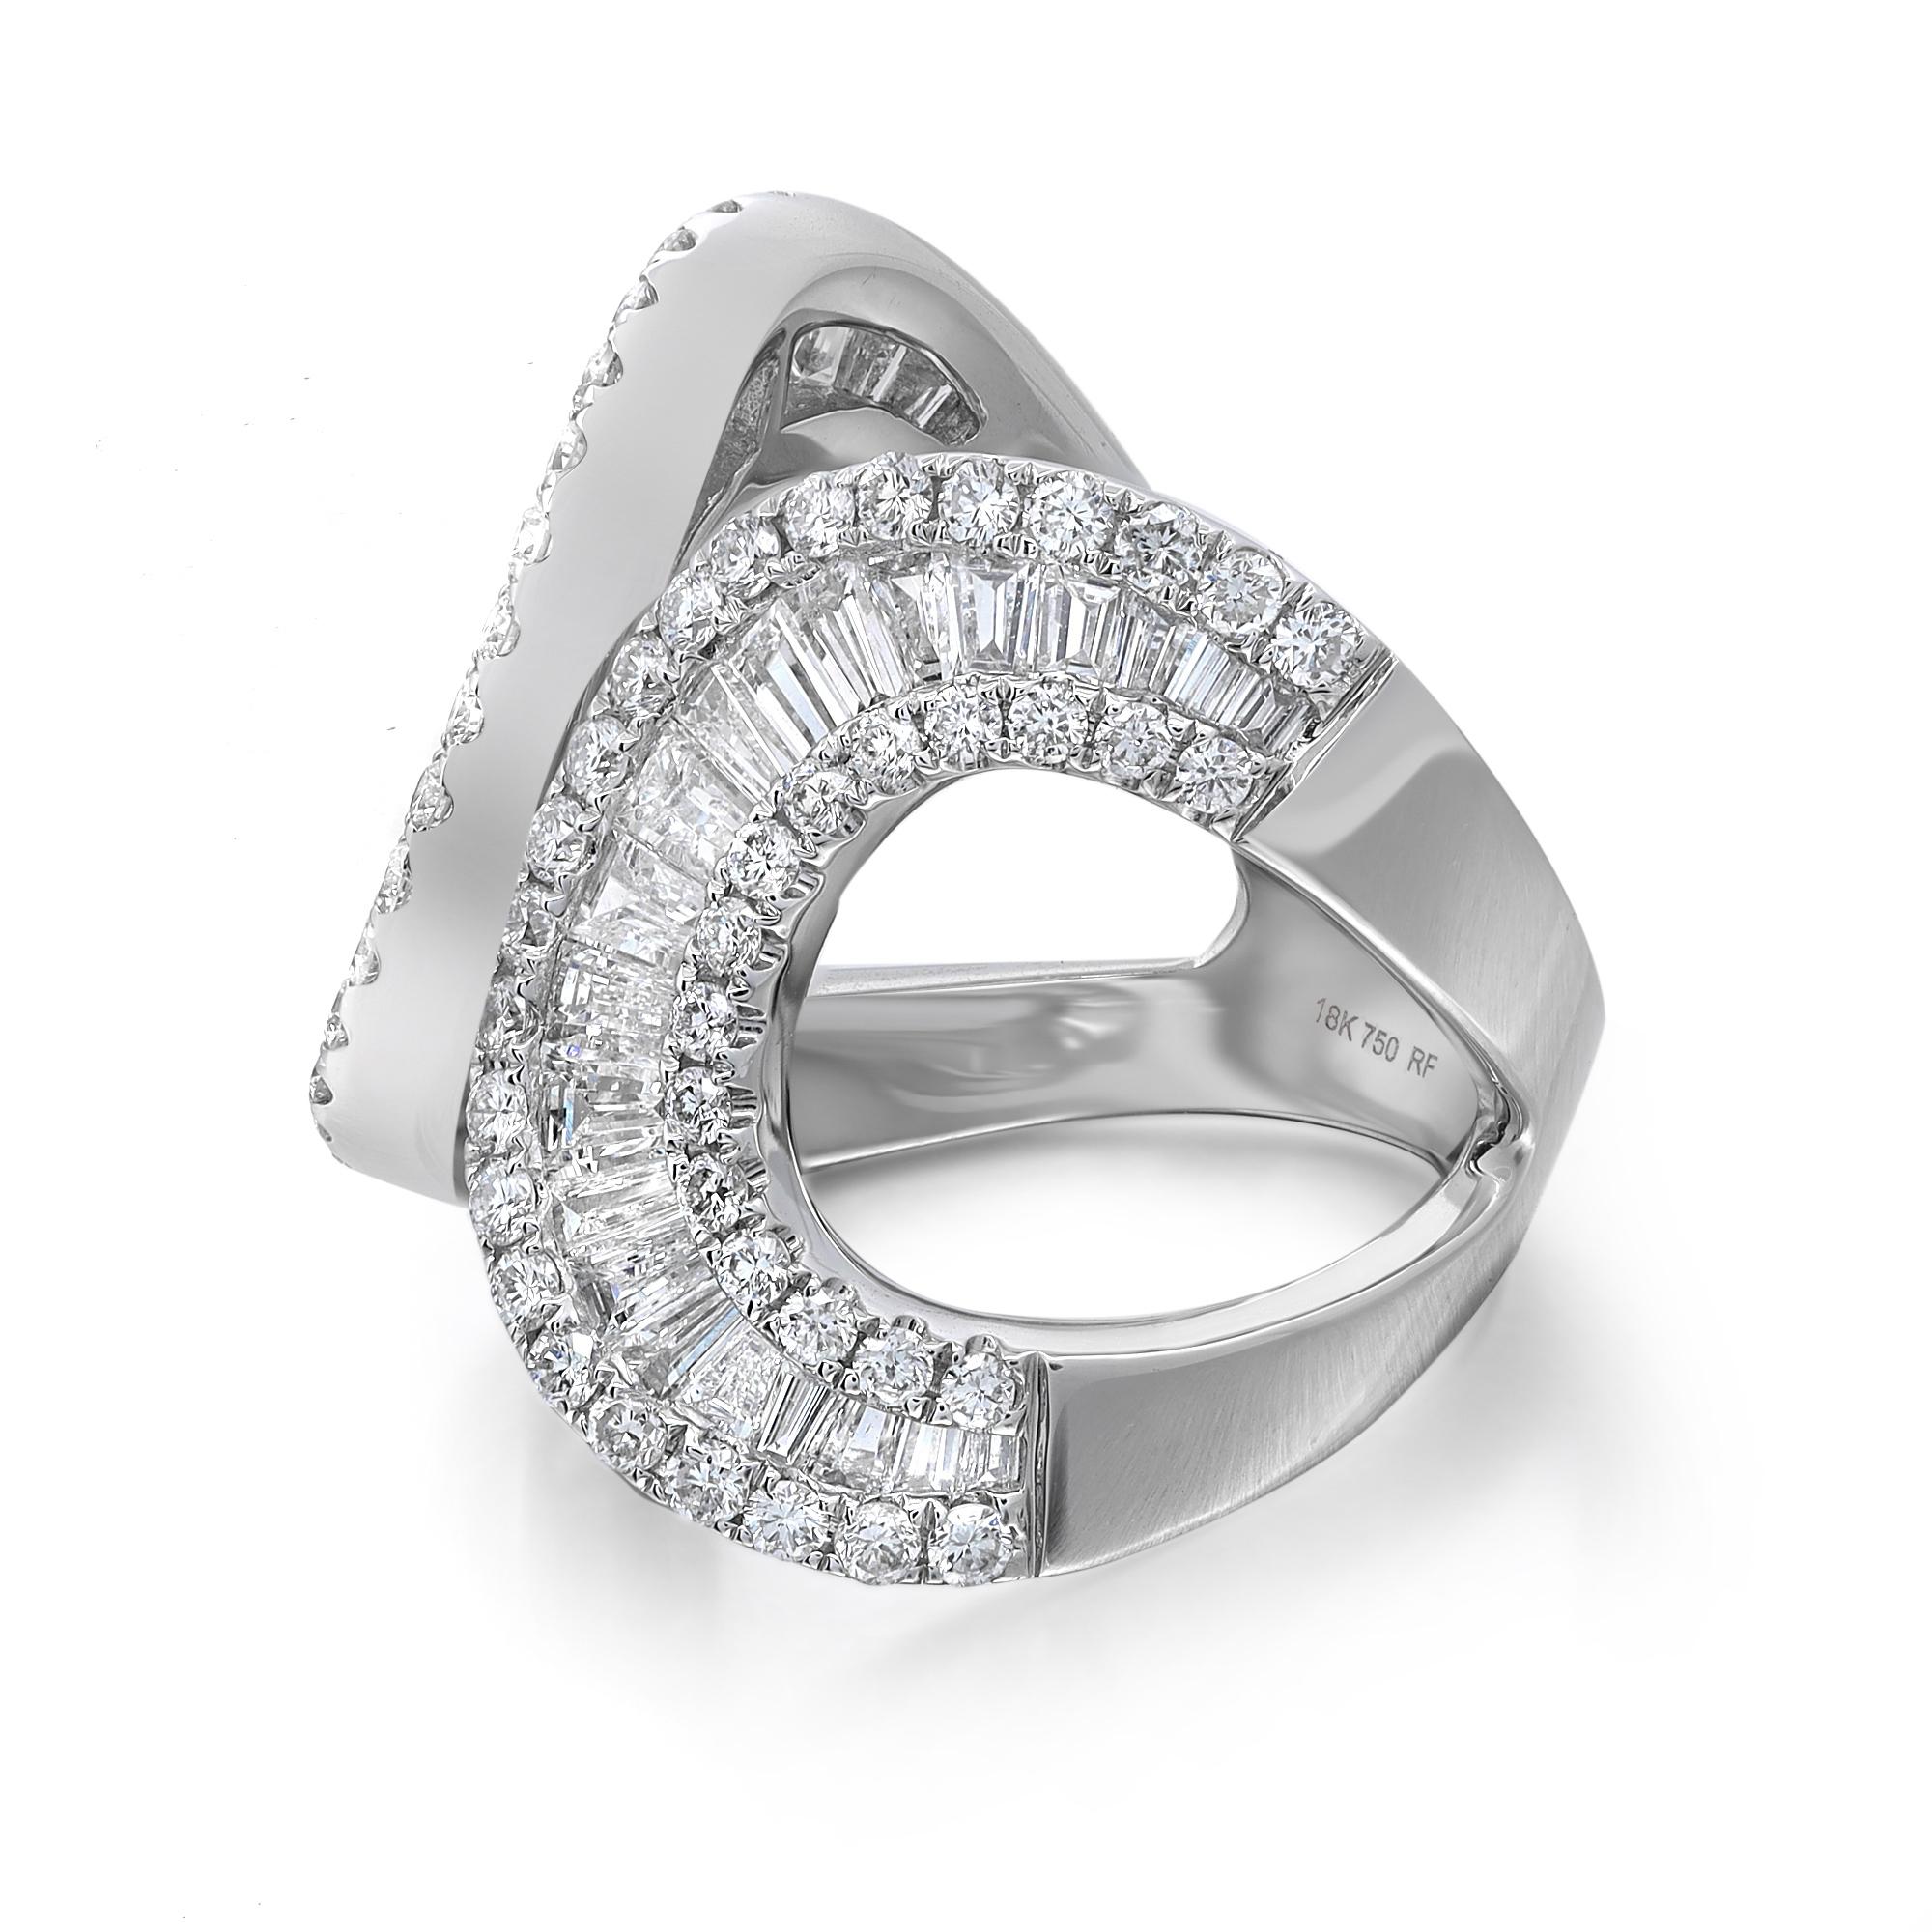 Chic and stylish diamond statement ring. It features channel set baguette cut and round brilliant cut diamonds perfectly encrusted in a high lustrous wide open band ring. Total diamond weight: 2.72 carats. Diamond quality: G-H color and VS-SI